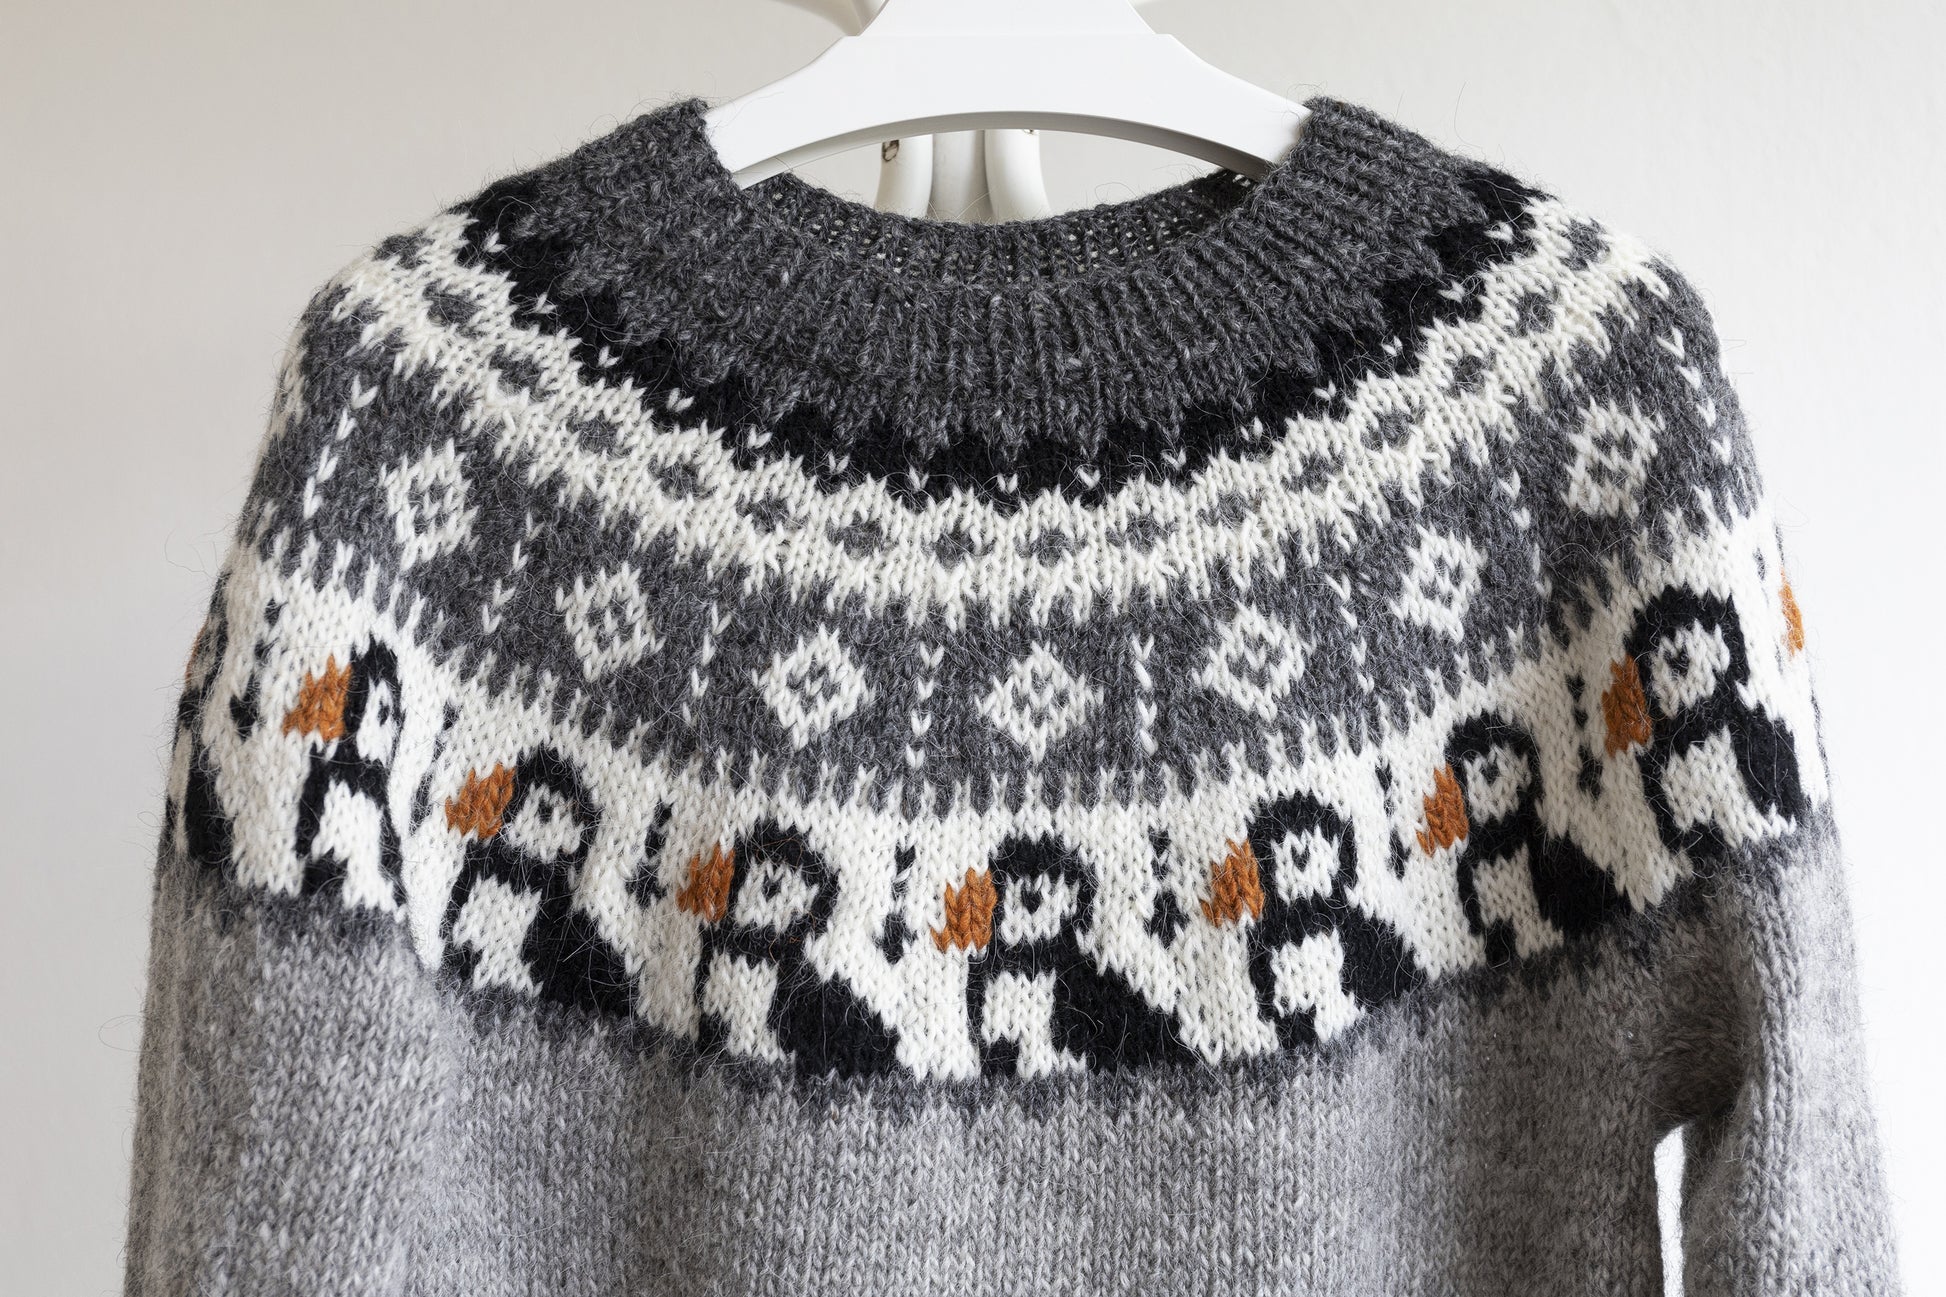 Close up for grey and white knitted Icelandic lopapeysa sweater in Puffins knitting pattern